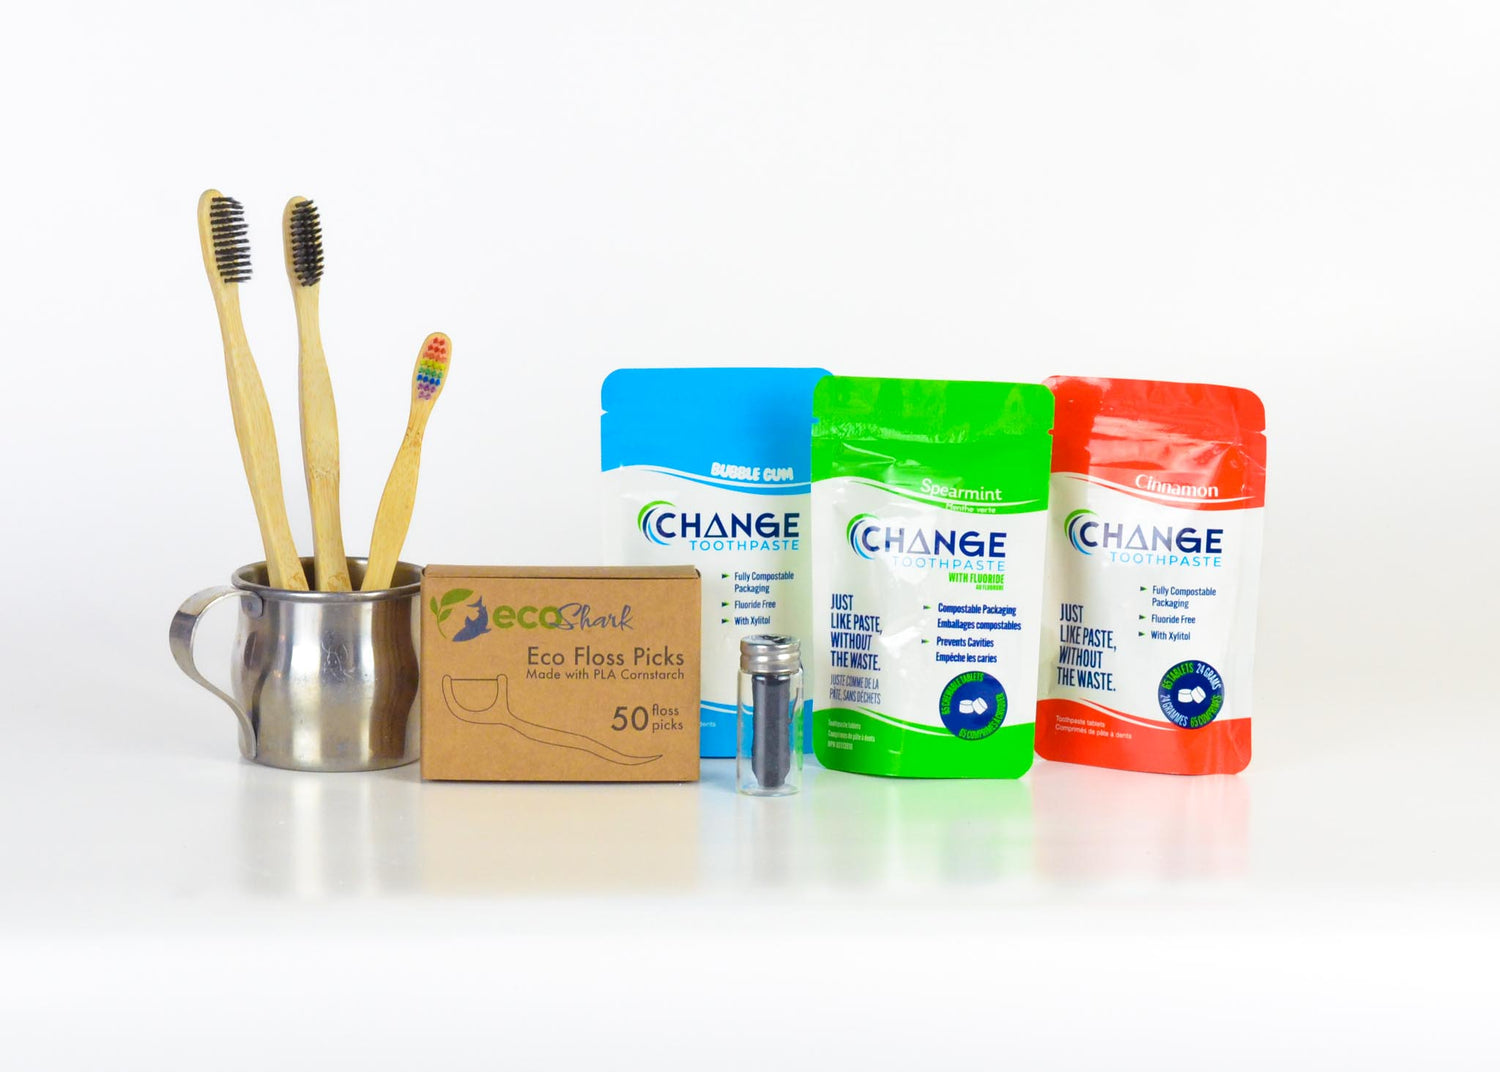 Eco Shark's biodegradable eco friendly Dental products collection